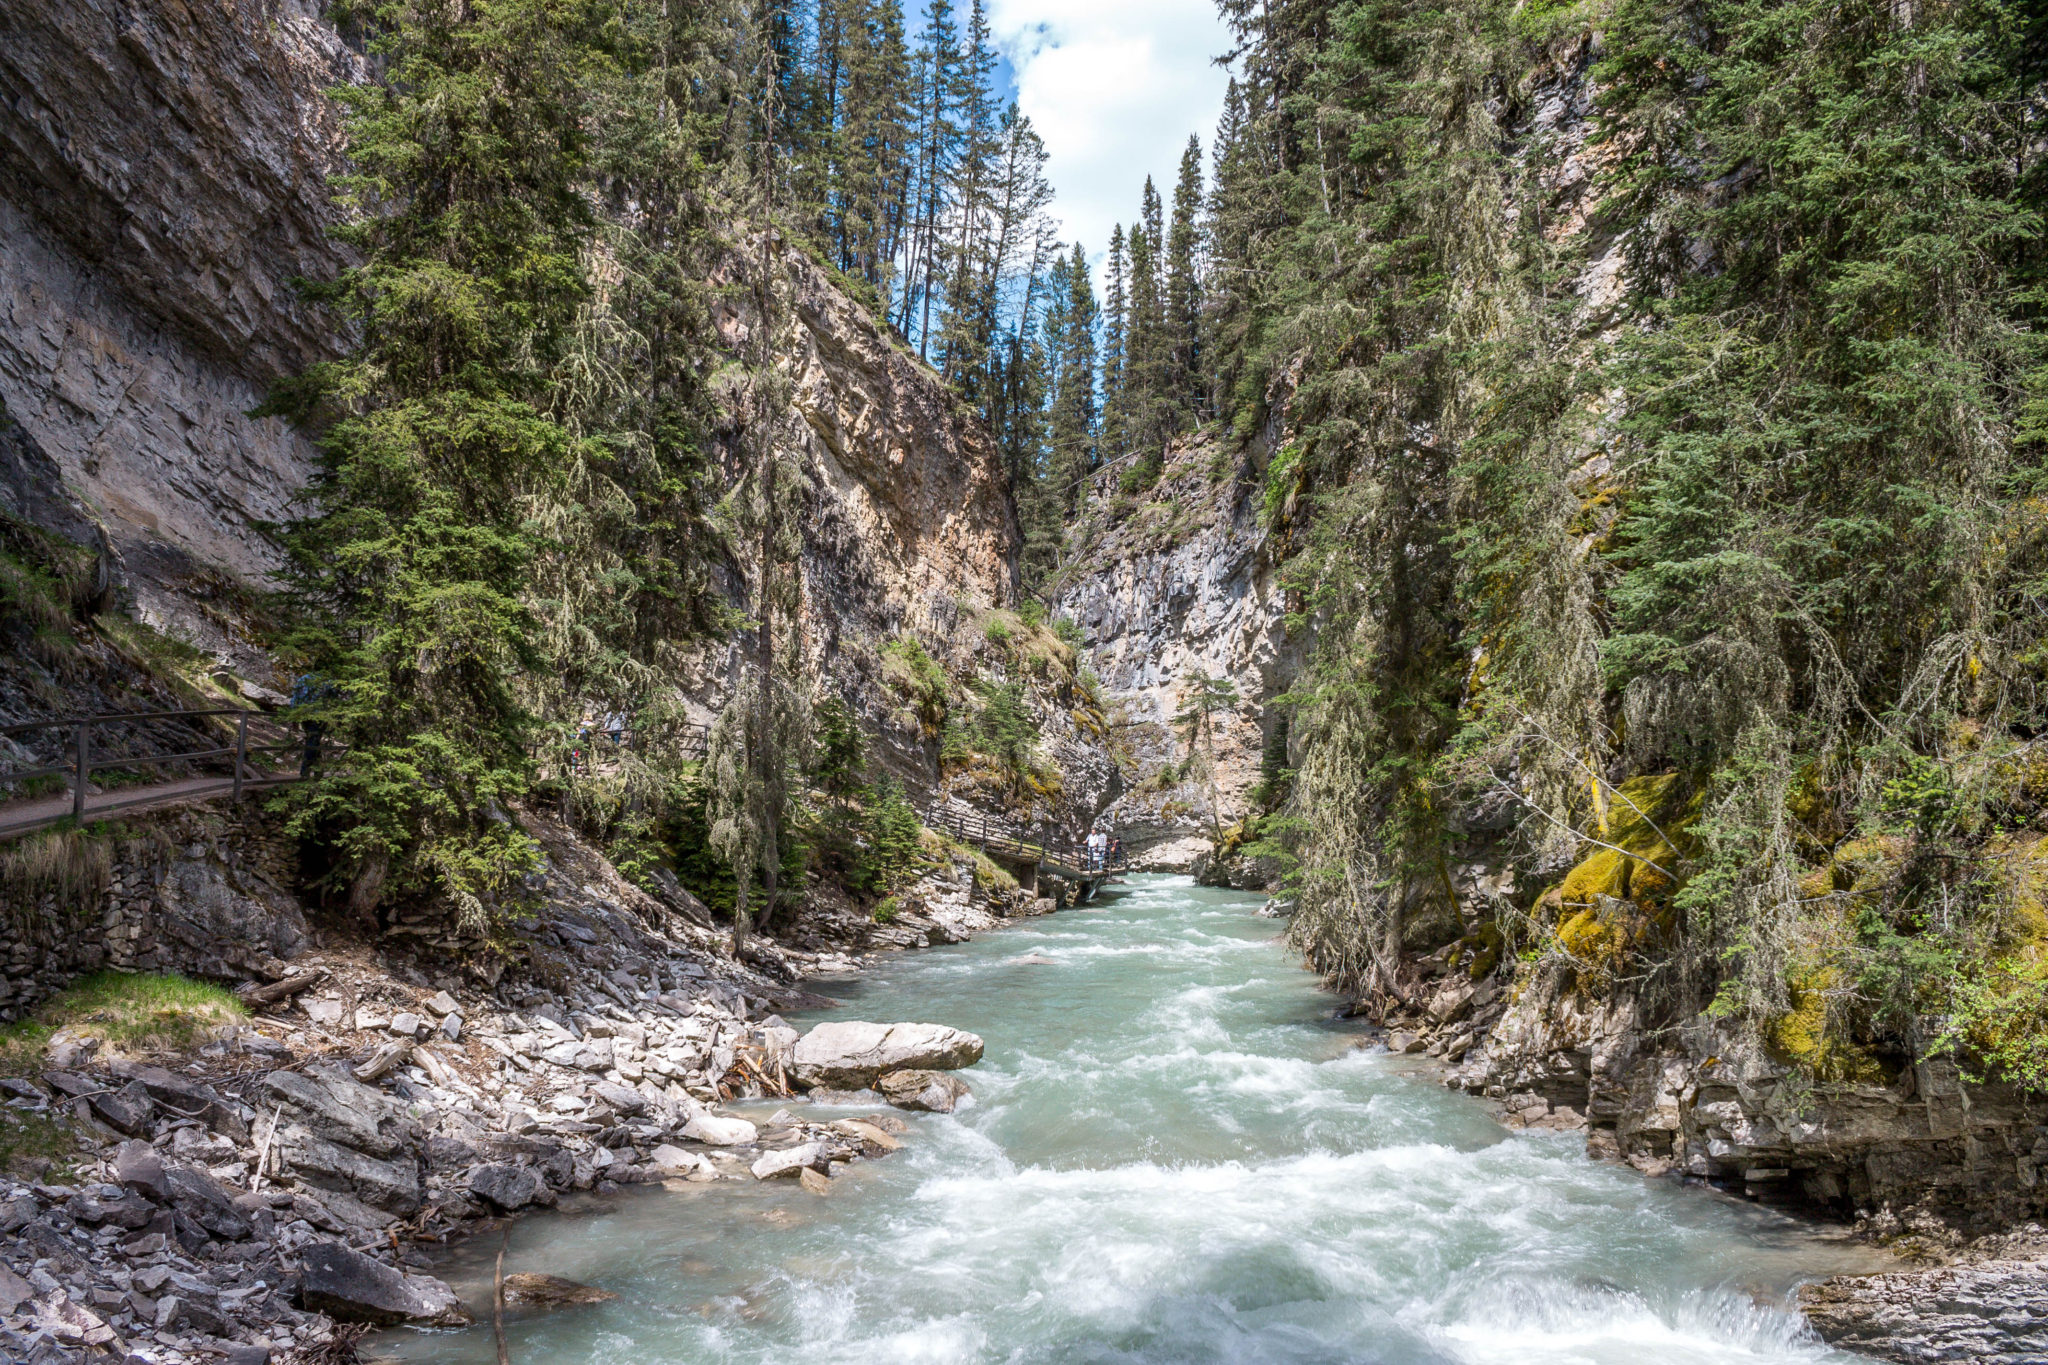 Johnston Canyon in Banff National Park, Alberta, Canada is a great 2 hour hike that takes you through some of the best scenery the Rockies has to offer. #travel #daytrip #hiking